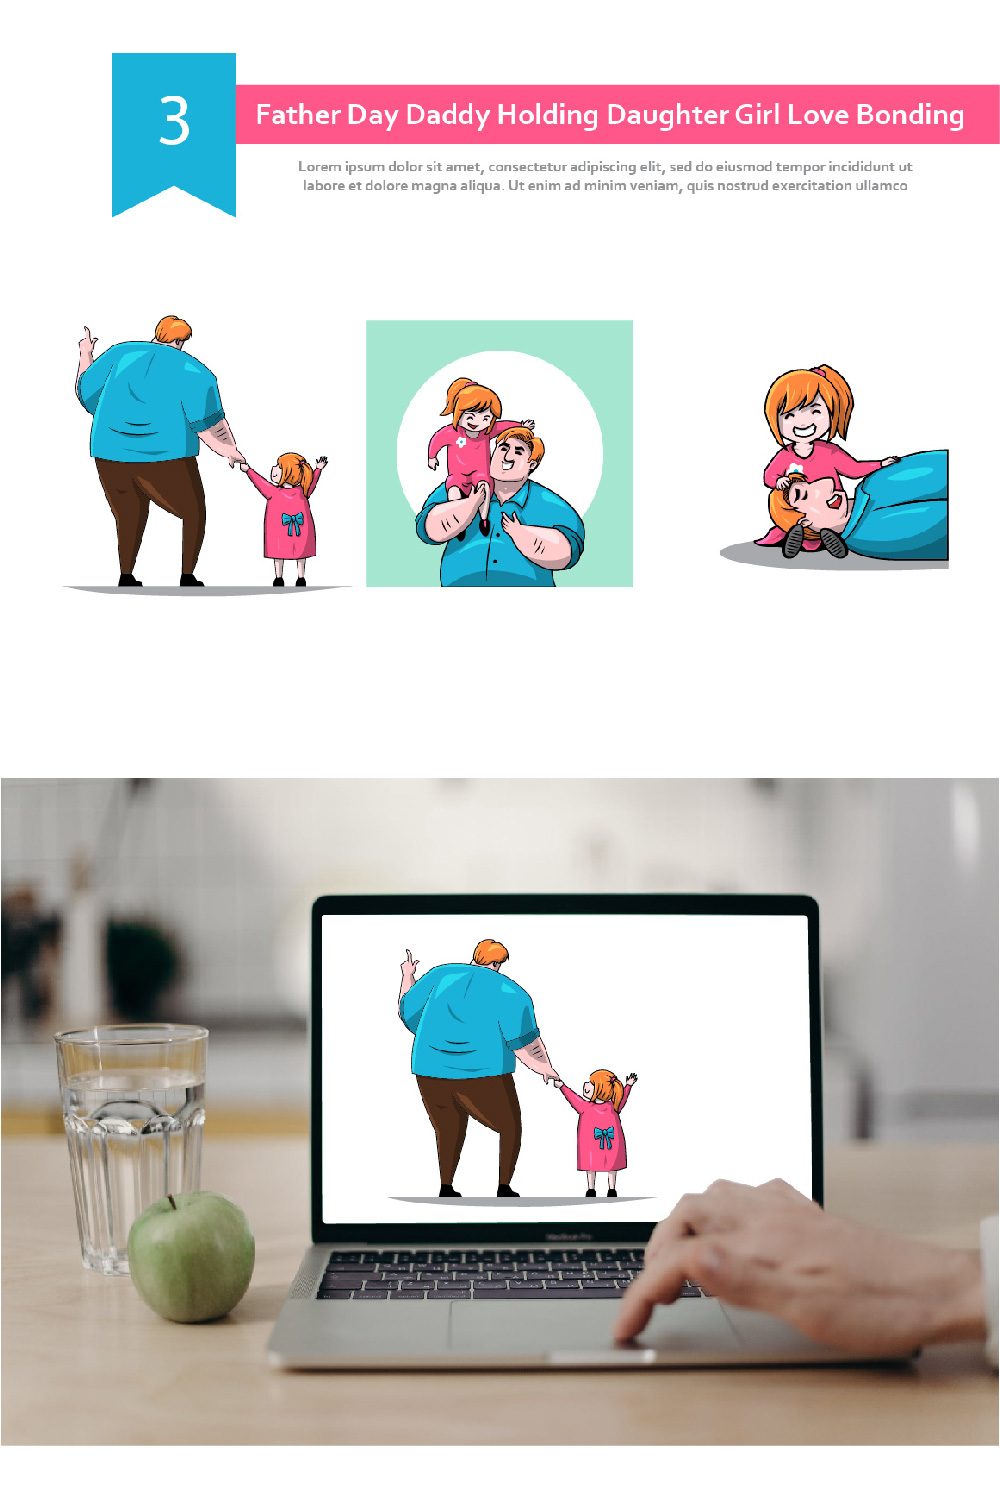 Daddy playing with Daughter - Mockup & Cartoon Example.